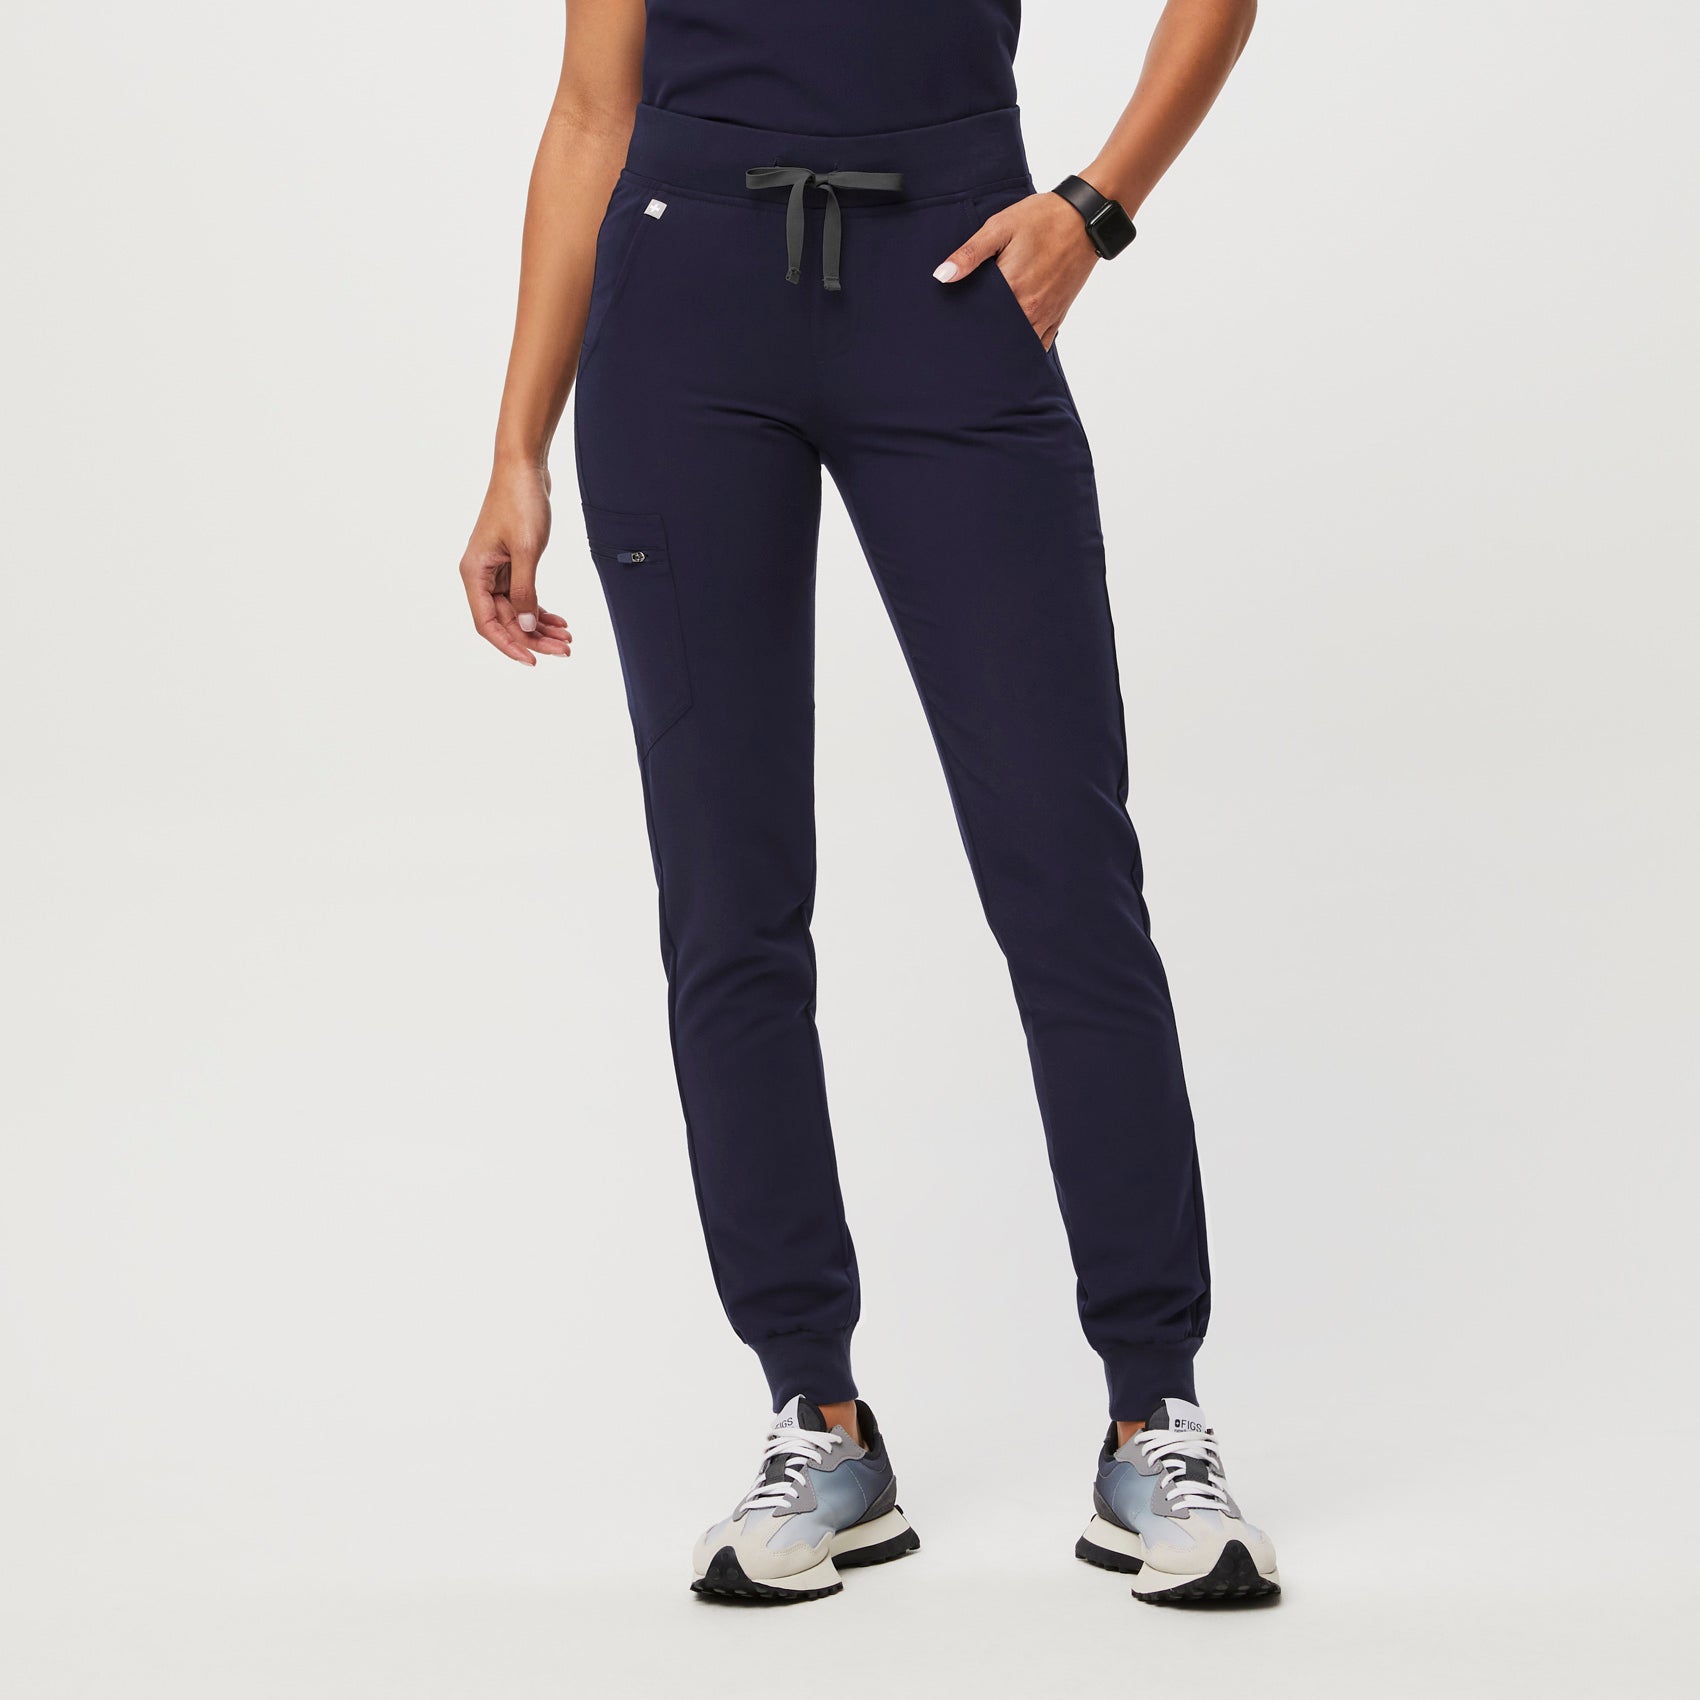 FIG Clothing Jogger Casual Pants for Women